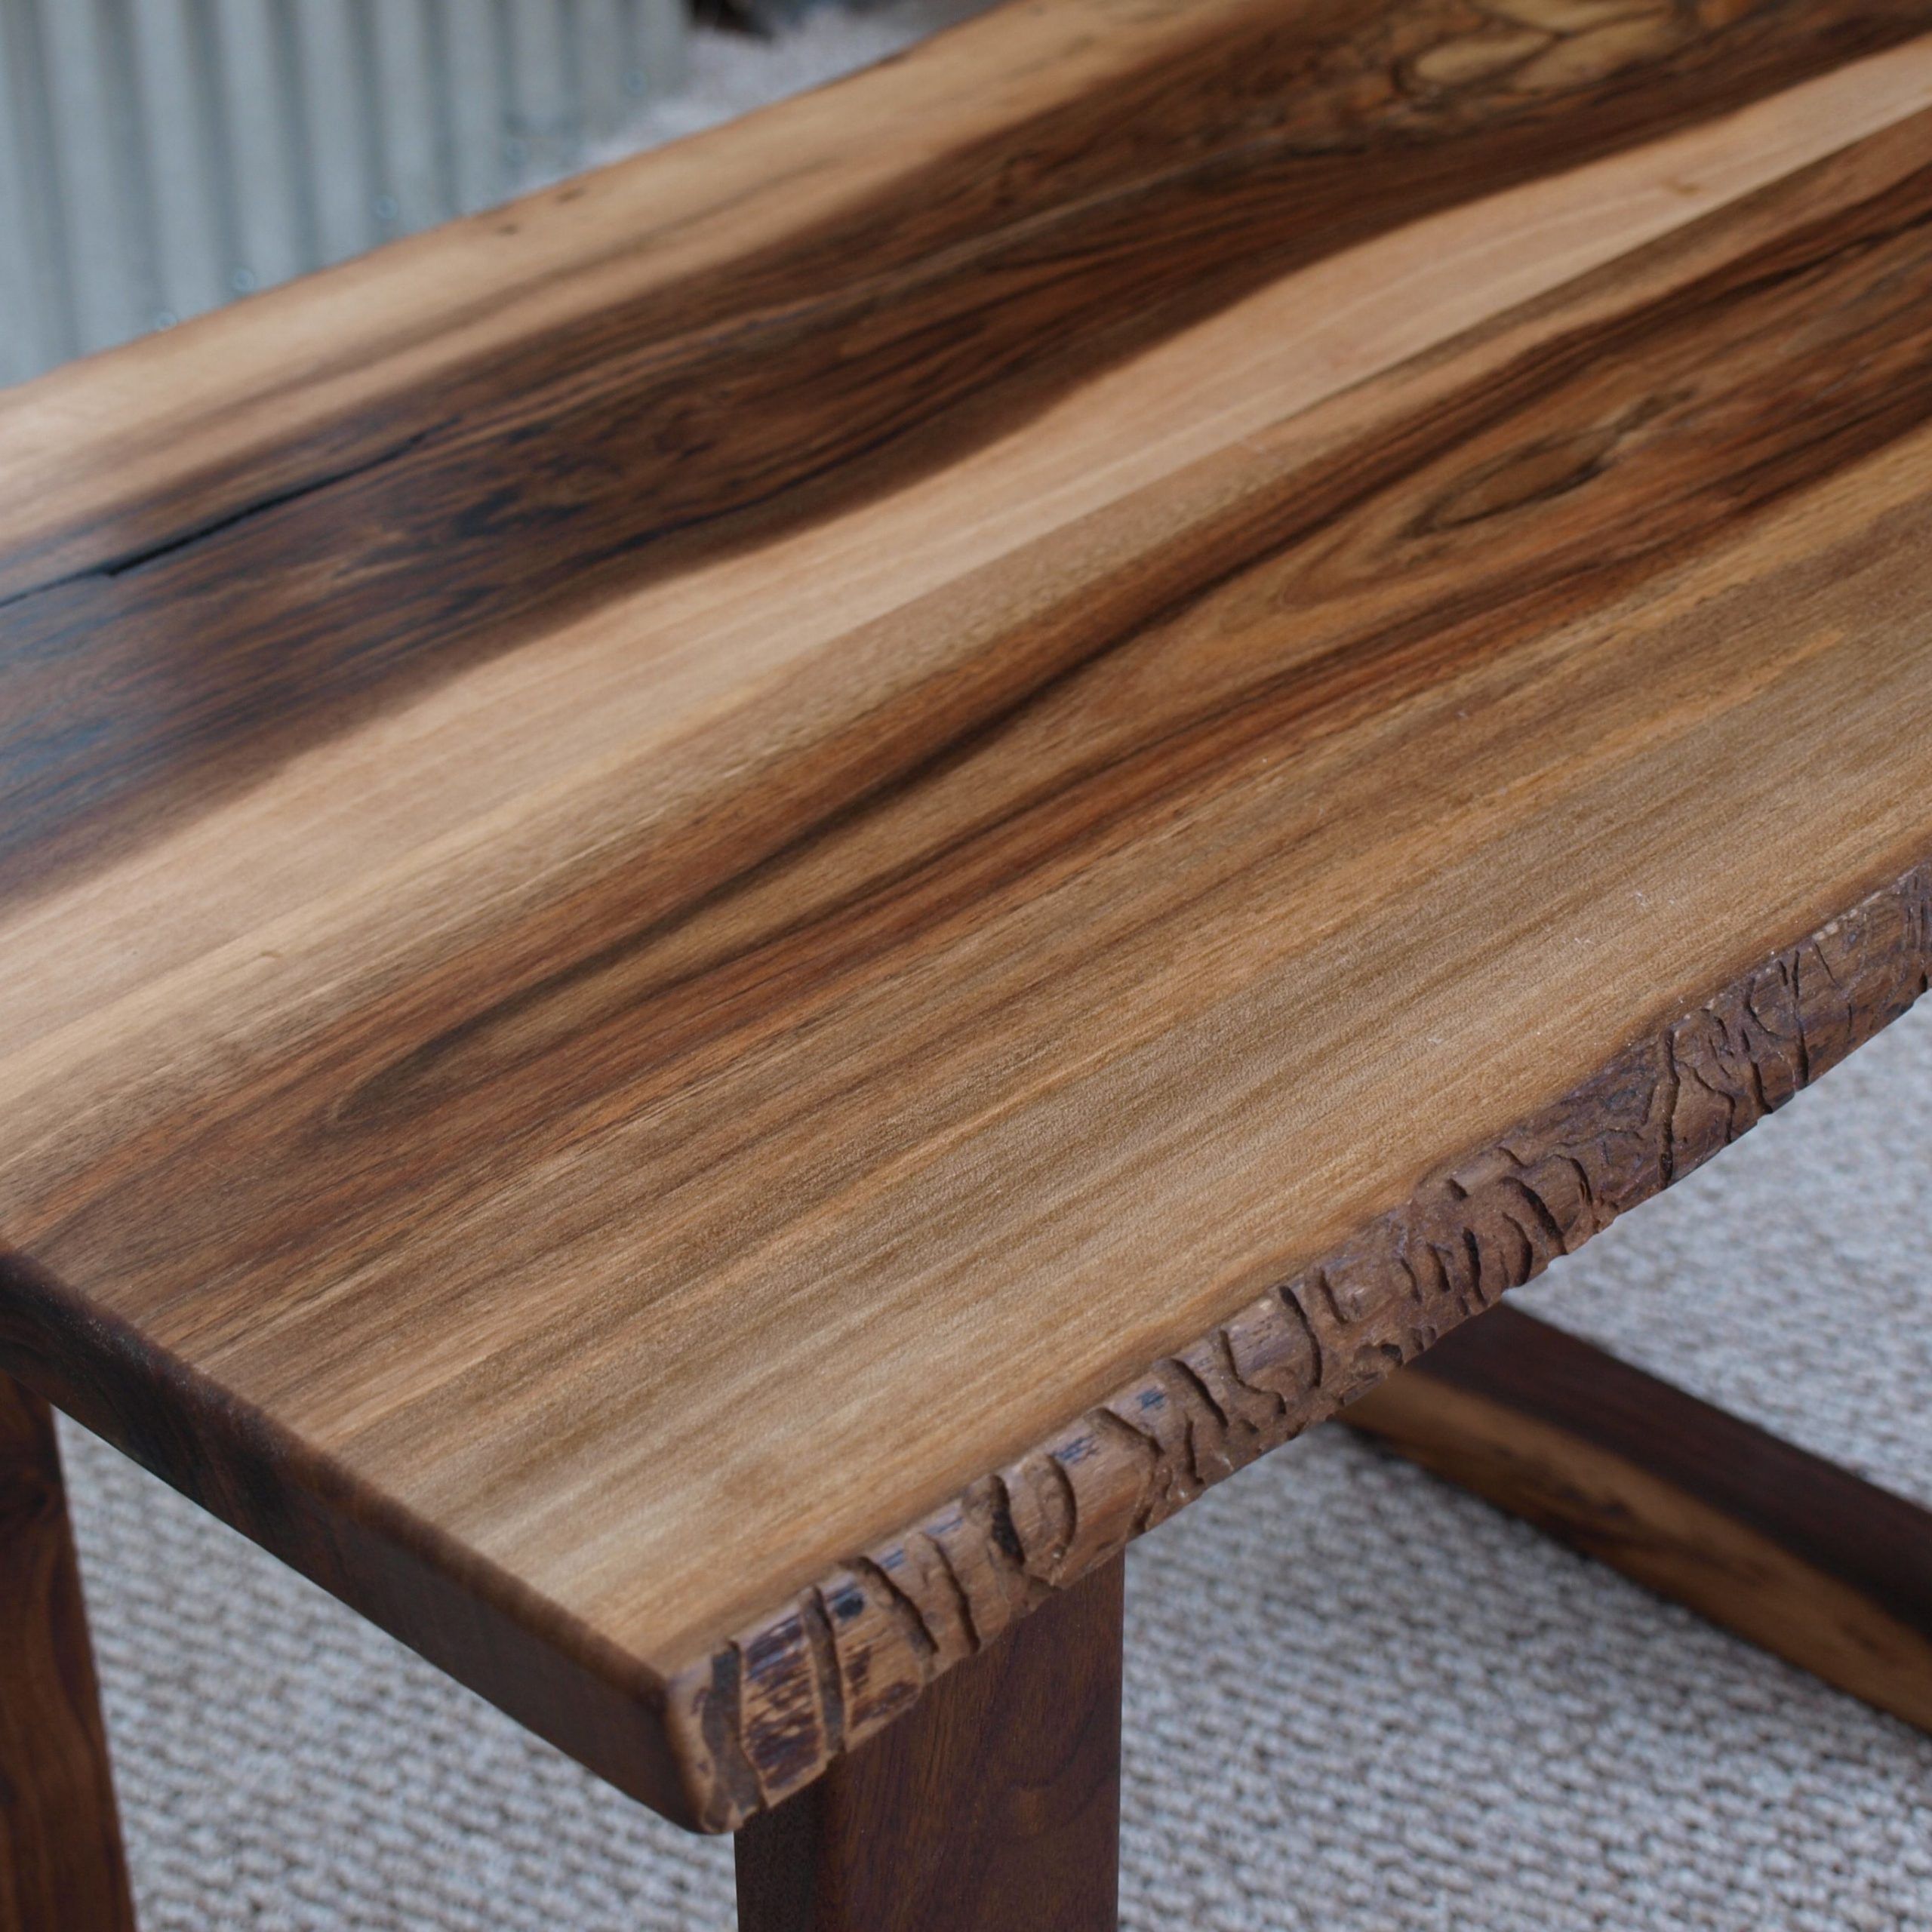 English Walnut Top & Black Walnut End Table | Outdoor Intended For Dark Walnut Drink Tables (View 8 of 15)